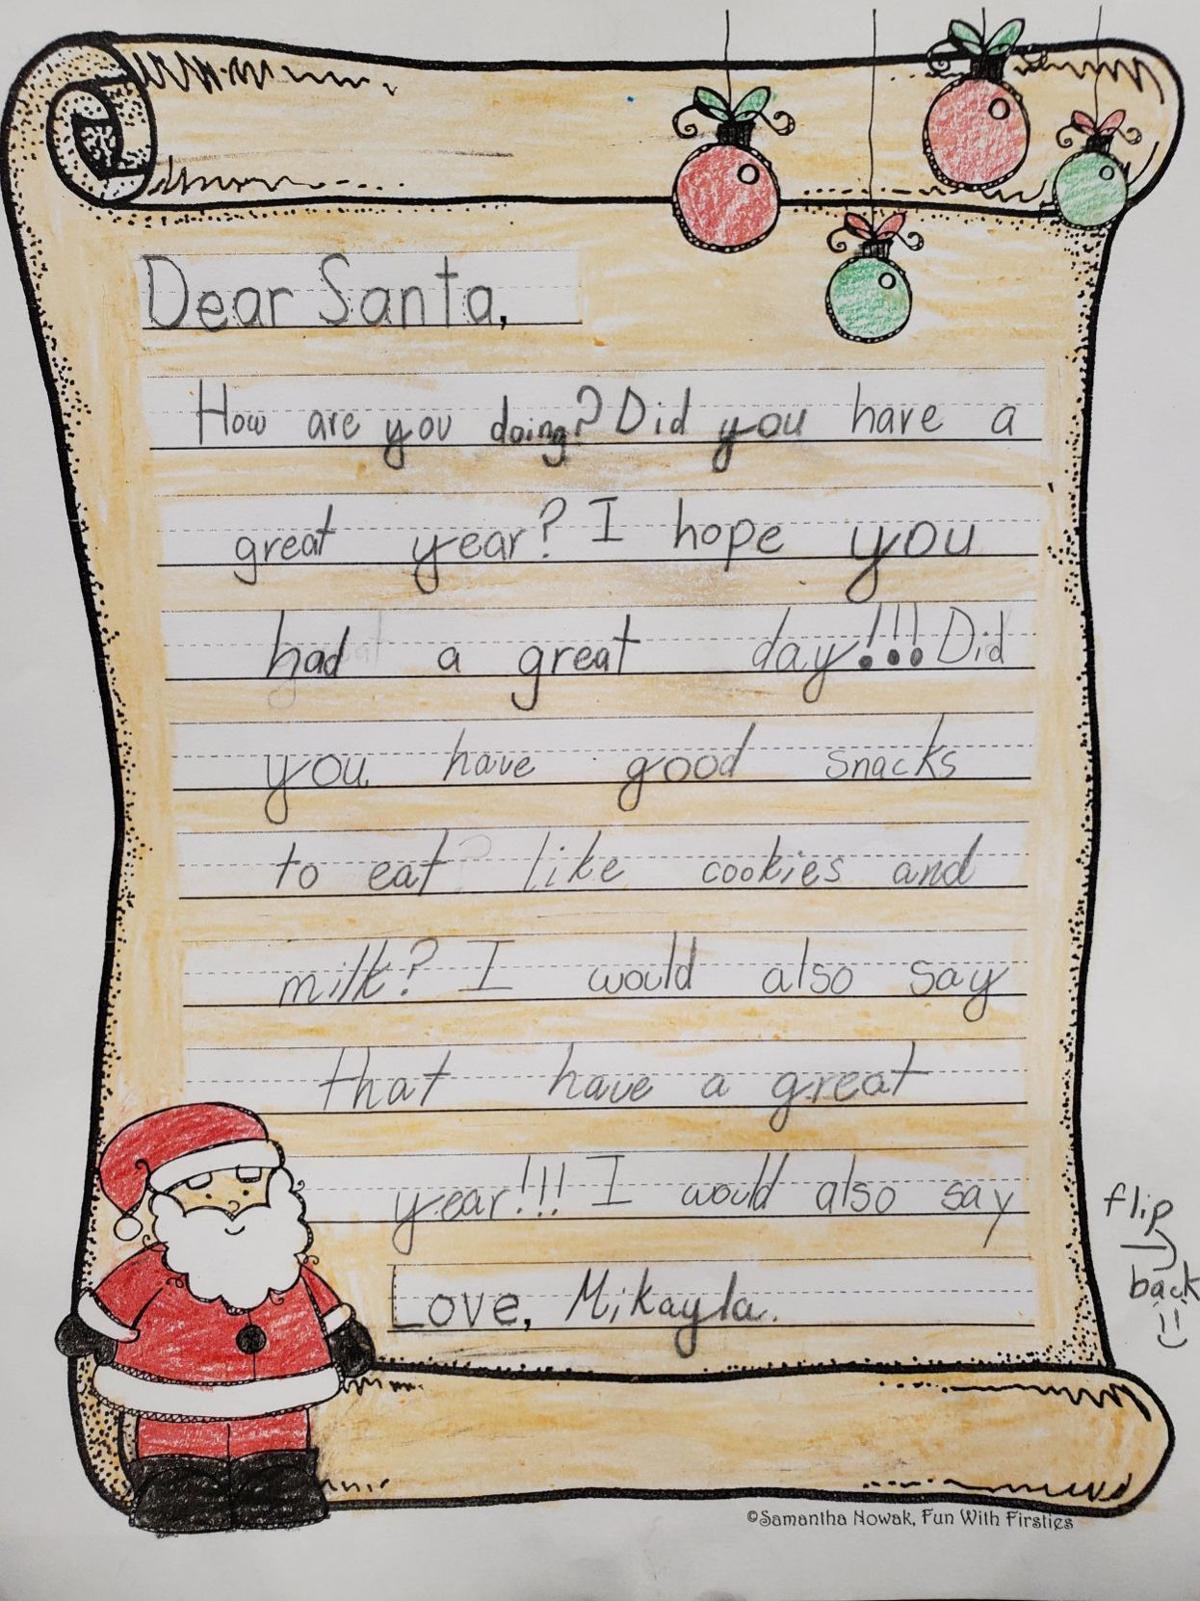 Culpeper Second Graders Send Their Christmas Wishes To The North Pole Latest News Starexponent Com - emerald theatre roblox handbook how to get free robux on